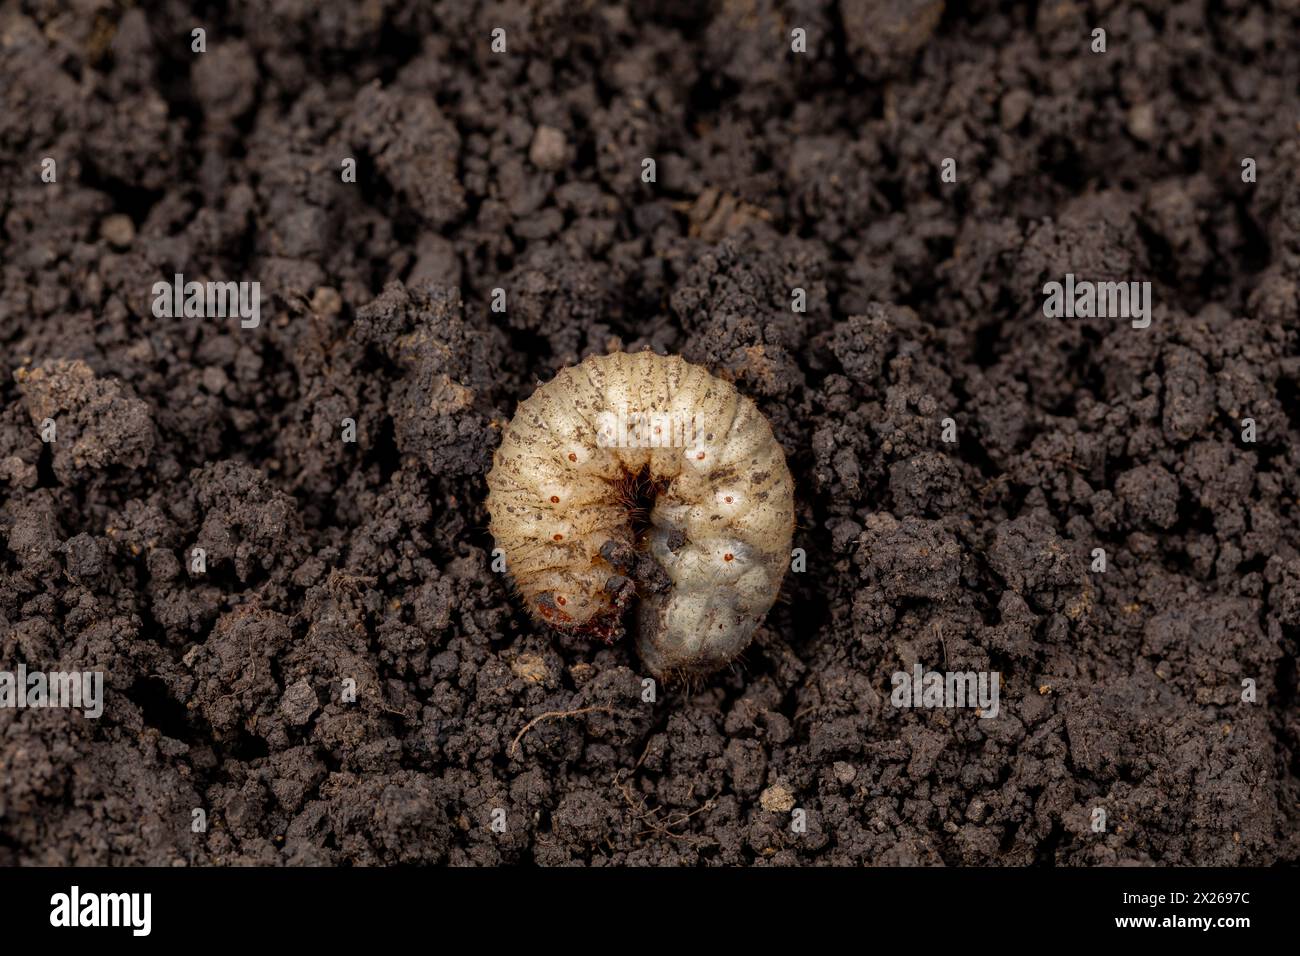 White grub in soil of lawn. Concept of lawncare, lawn and garden pest control. Stock Photo